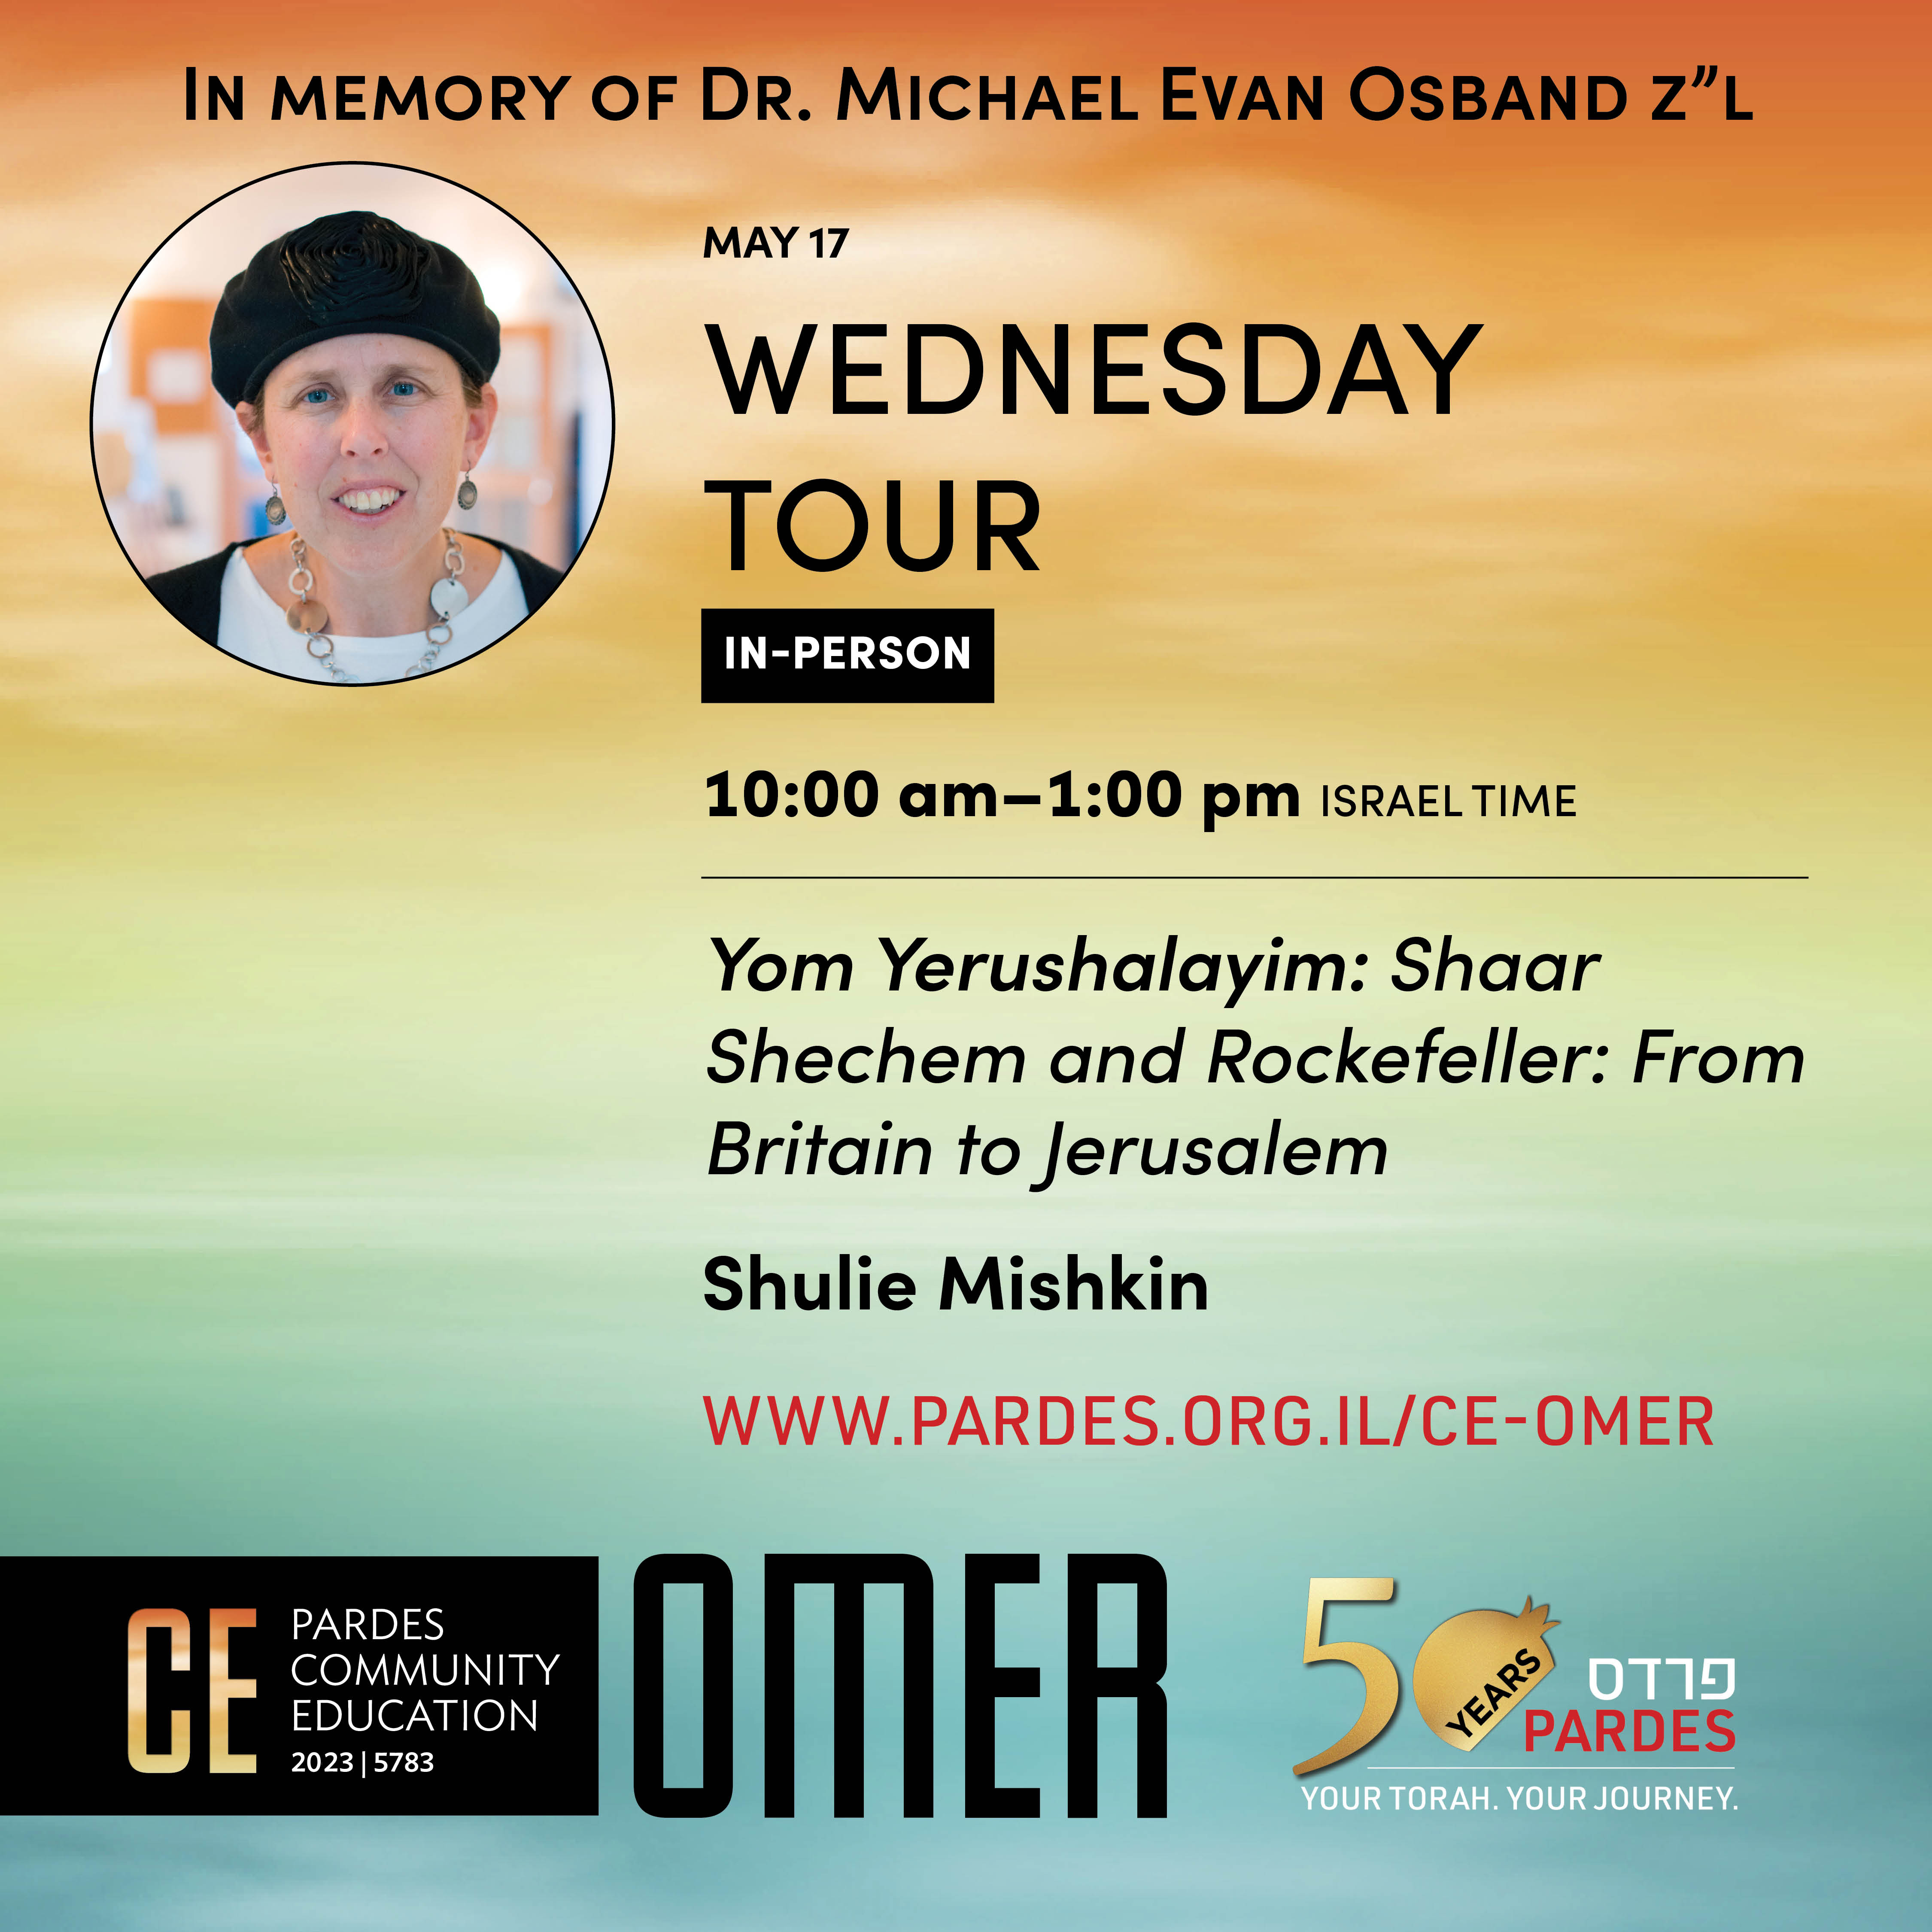 [Sold Out] [Tour] Yom Yerushalayim: Shaar Shechem and Rockefeller - From Britain to Jerusalem